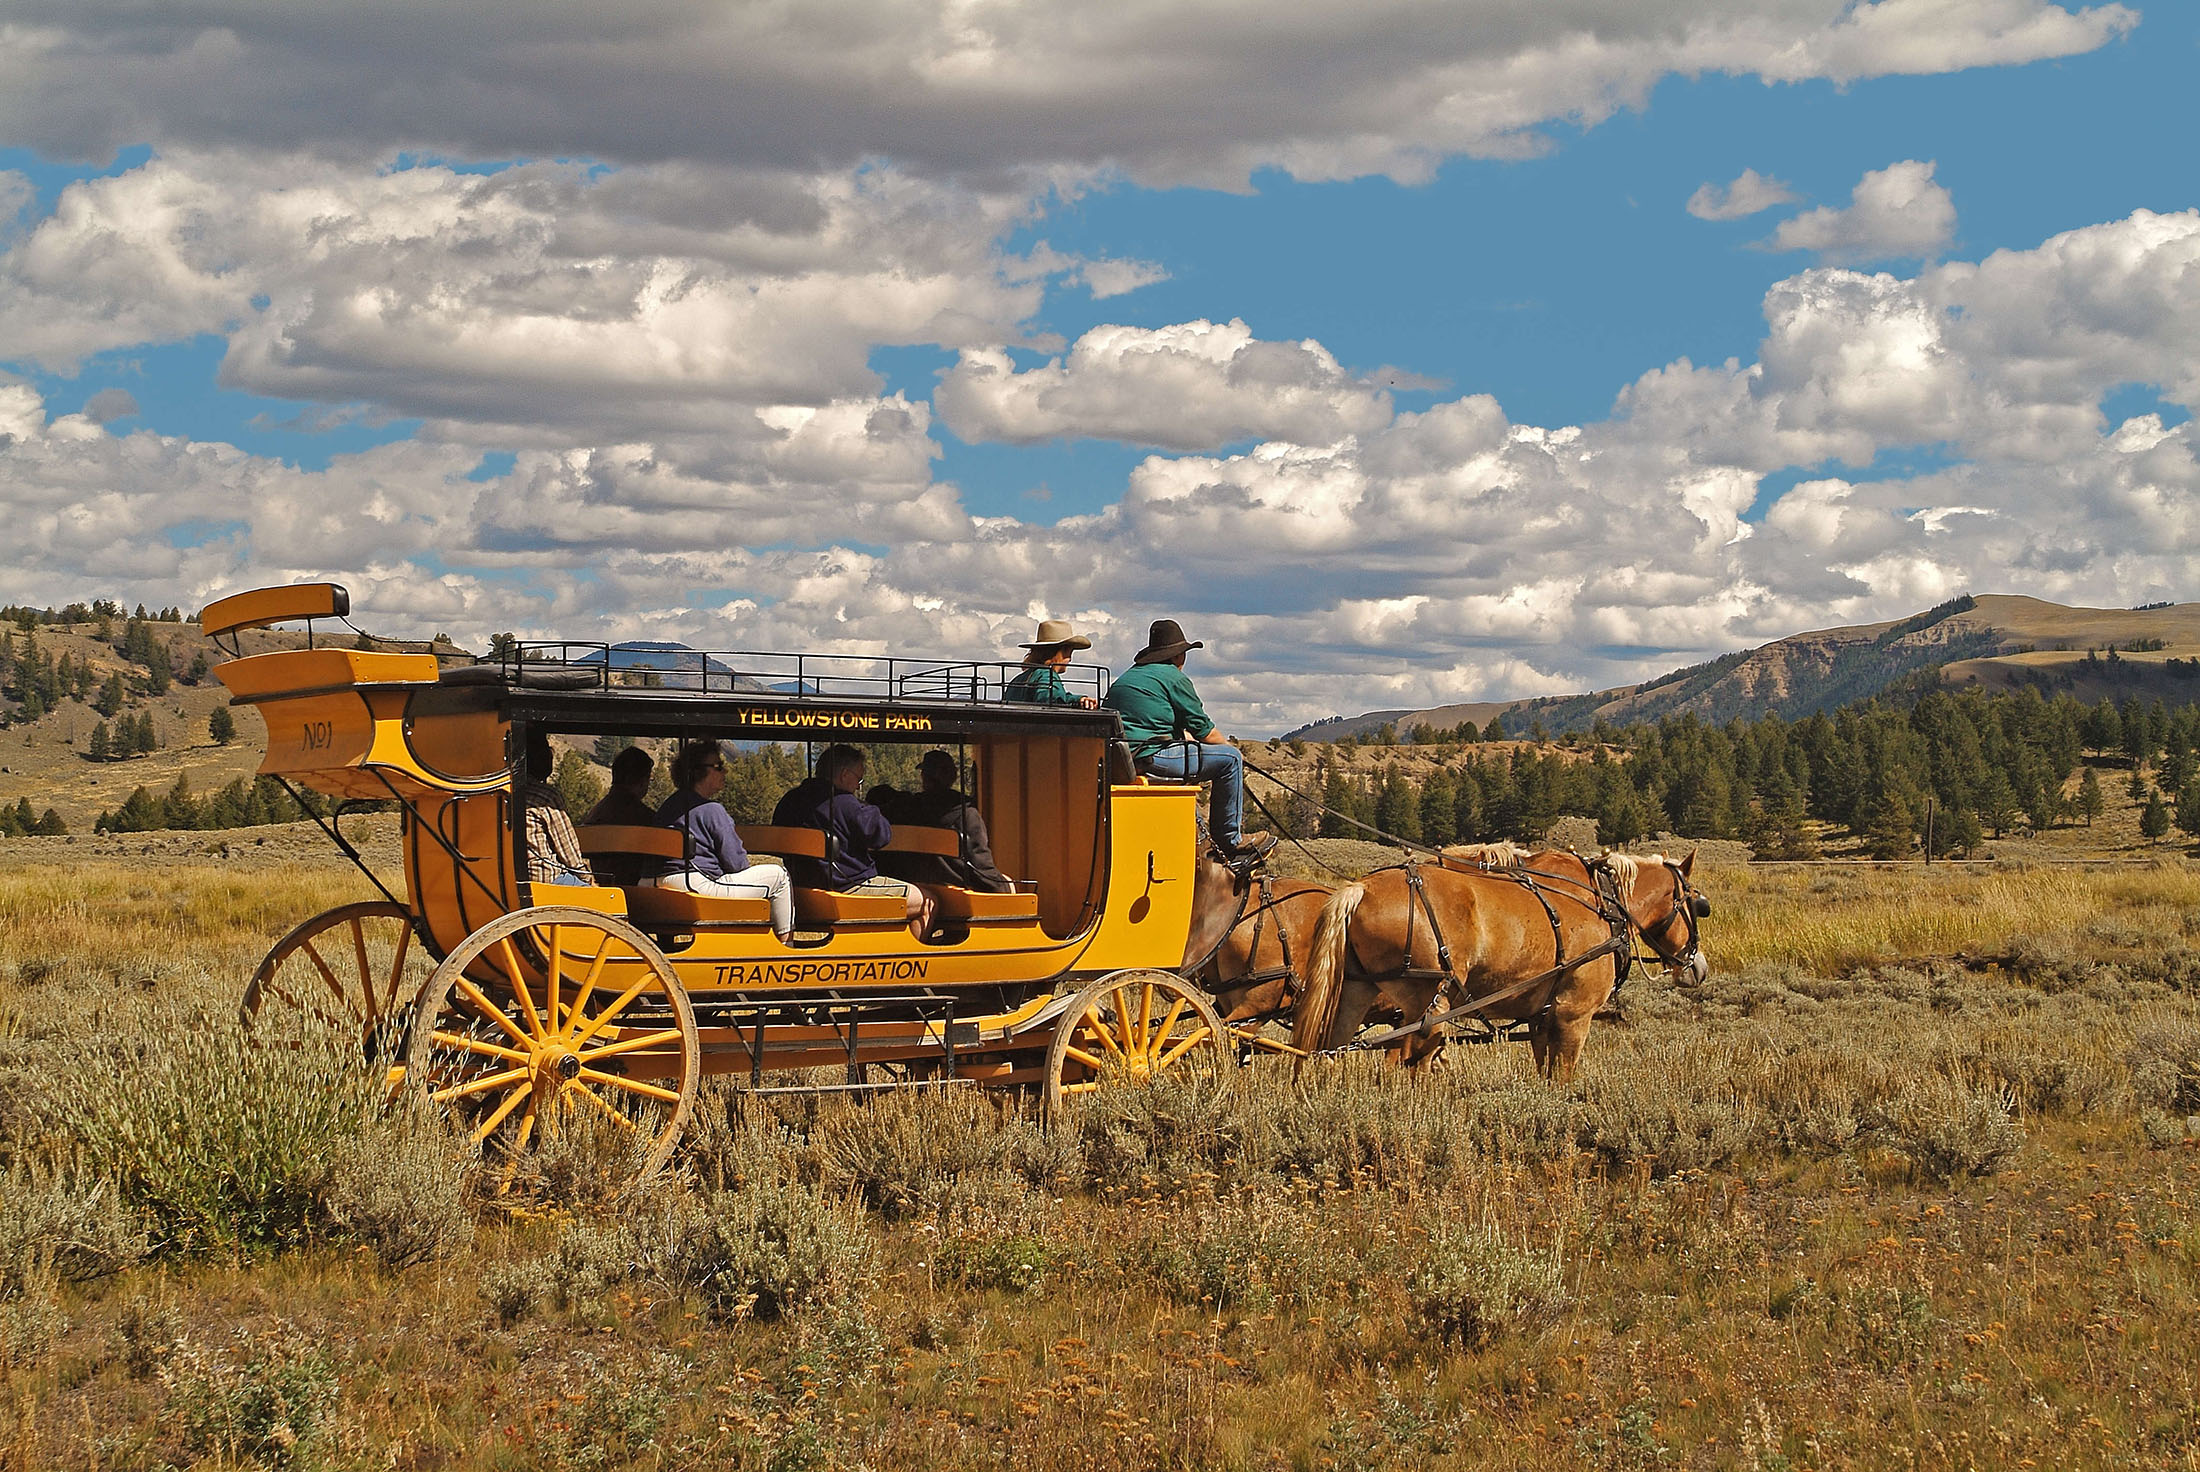 Passengers on stagecoach in the field